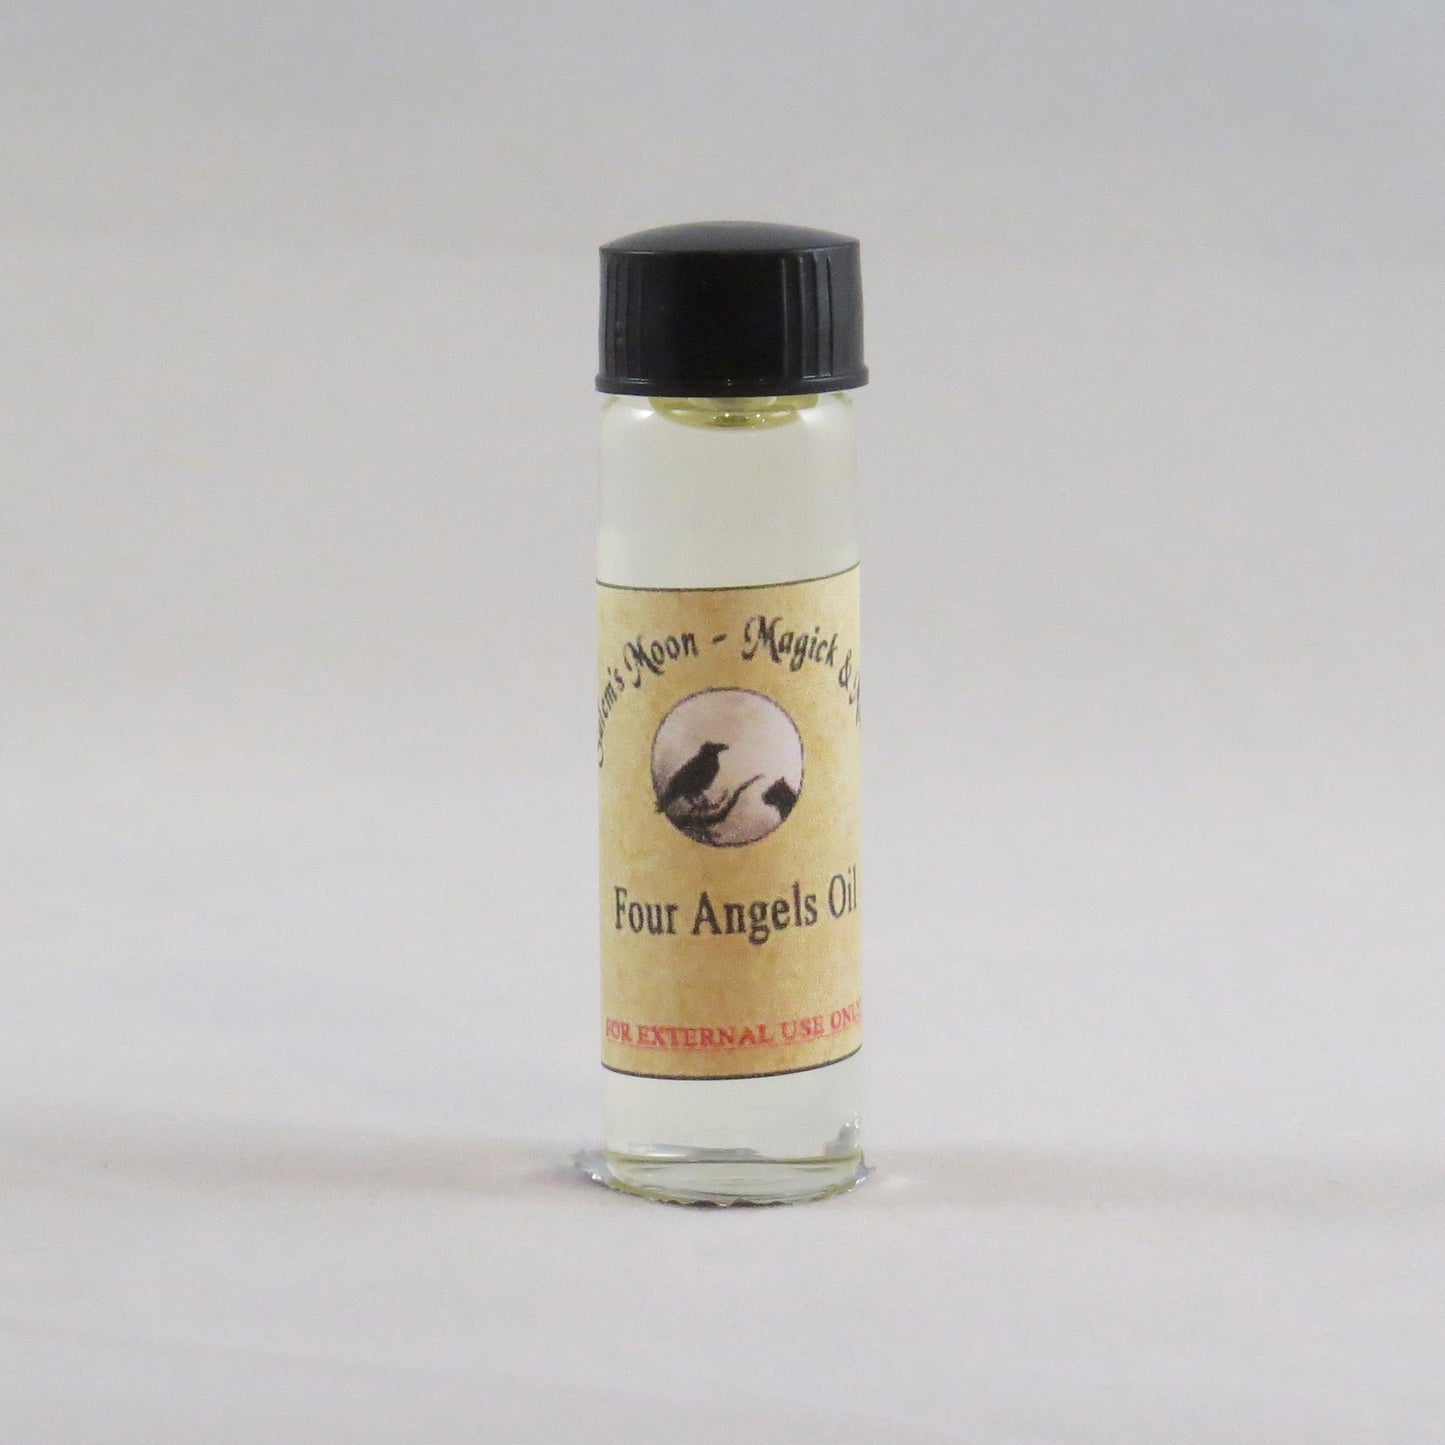 Four Angels Oil